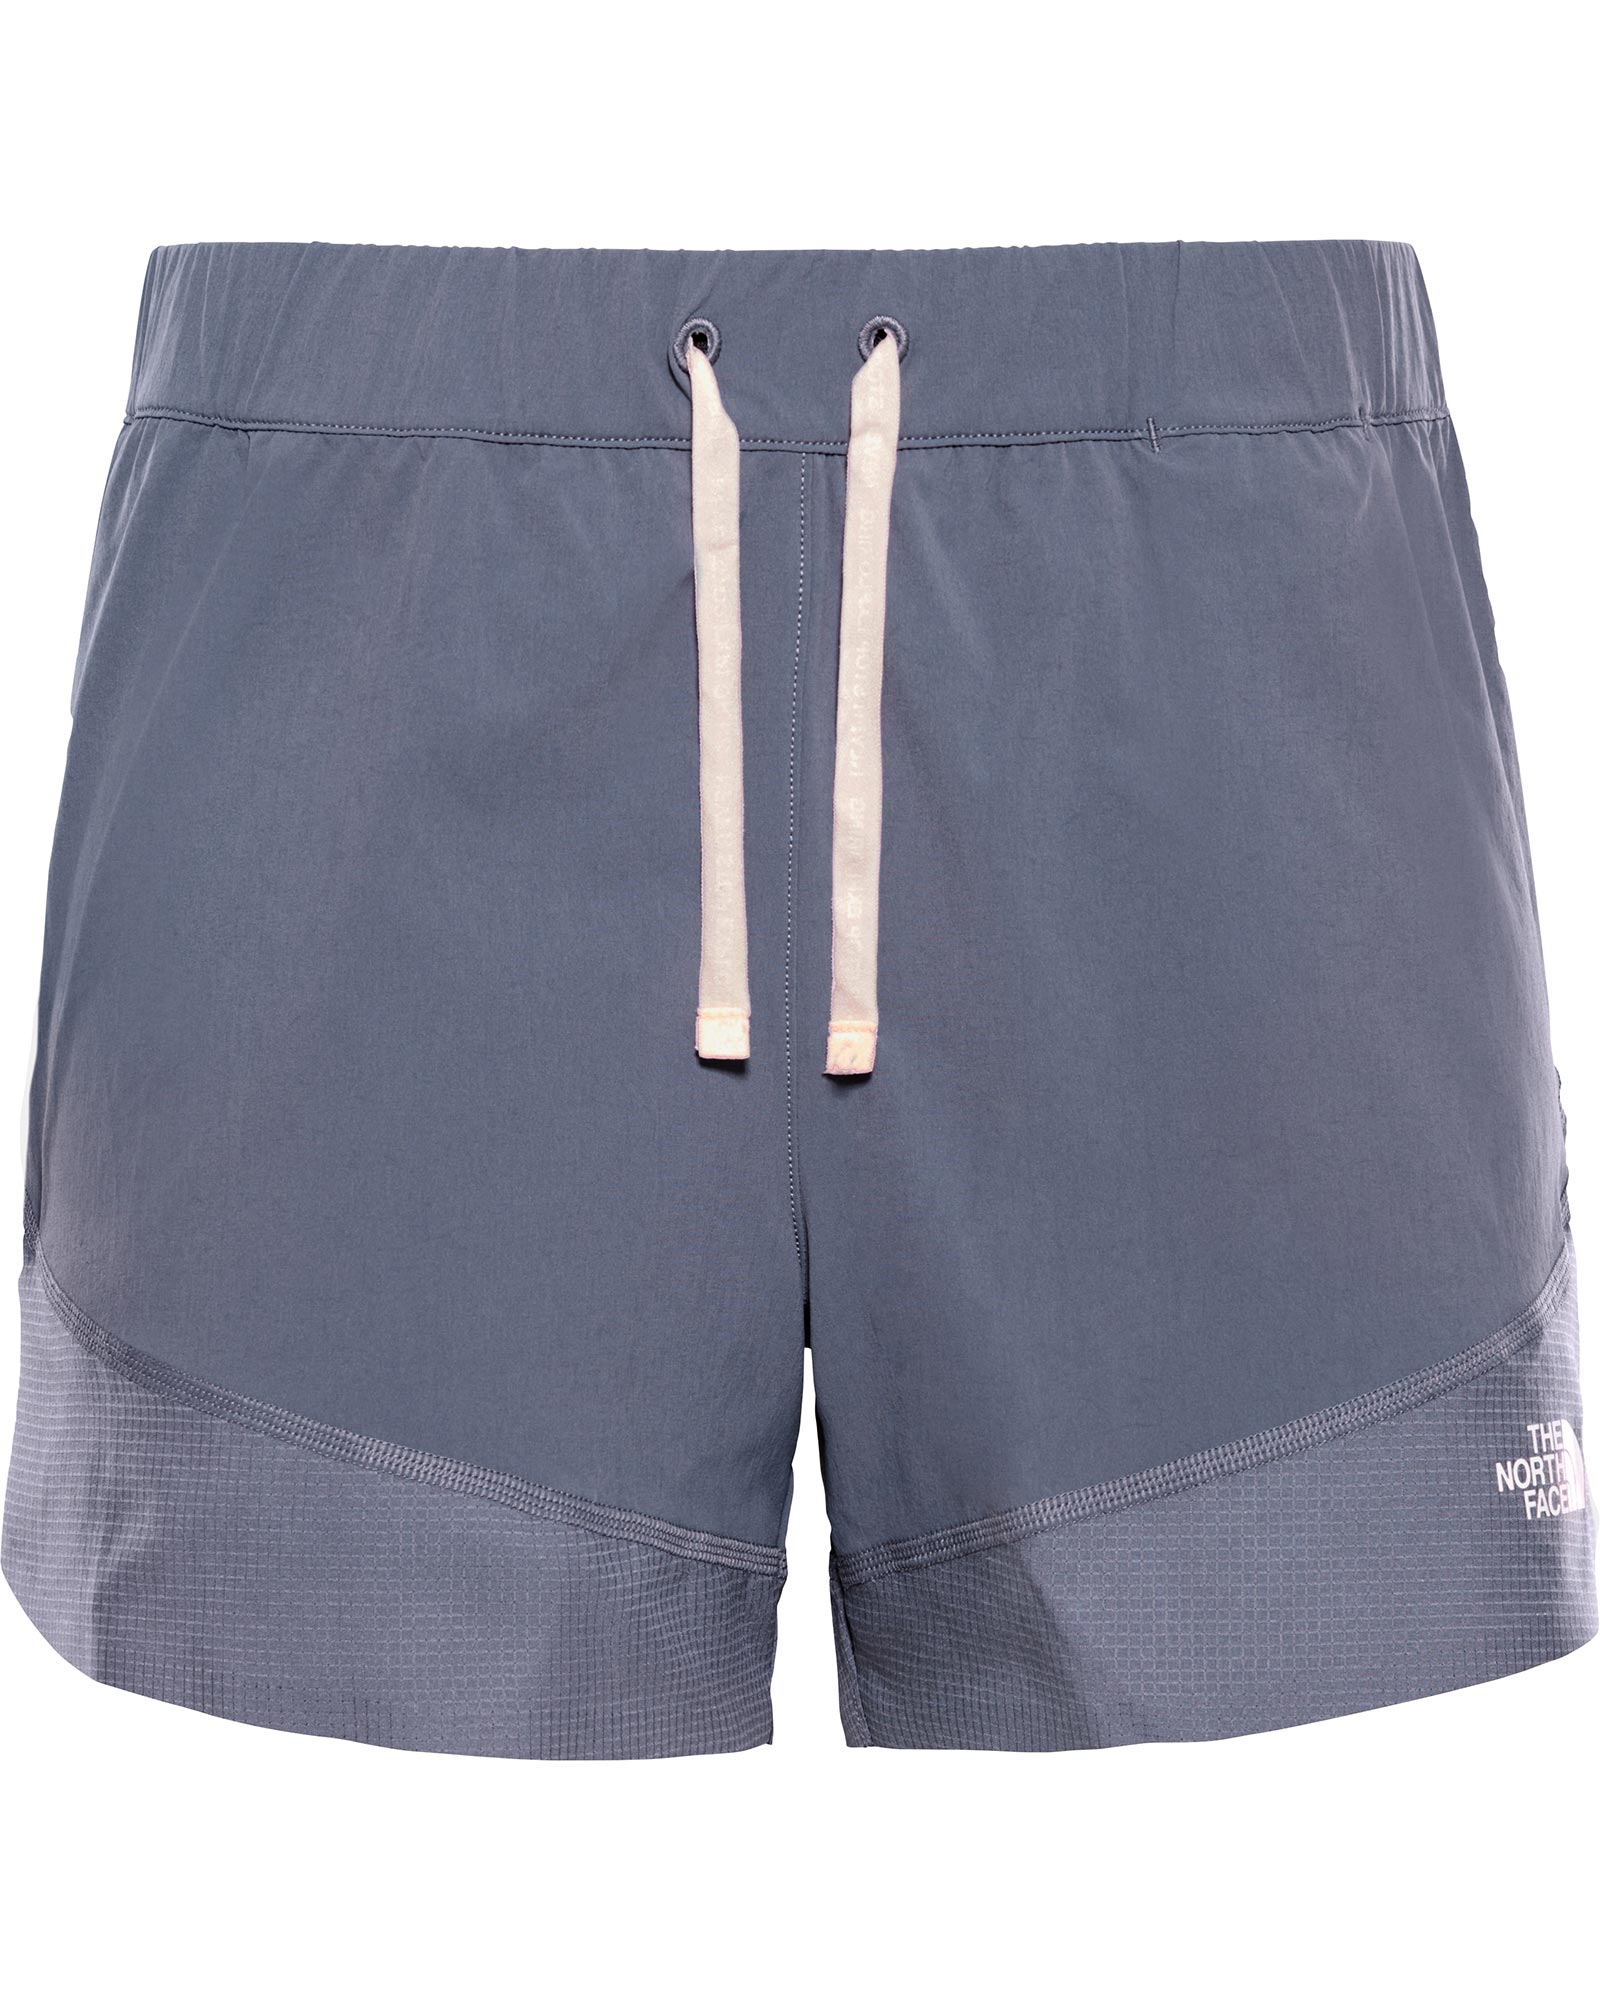 The North Face Invene Women’s Shorts - Grisaille Grey L